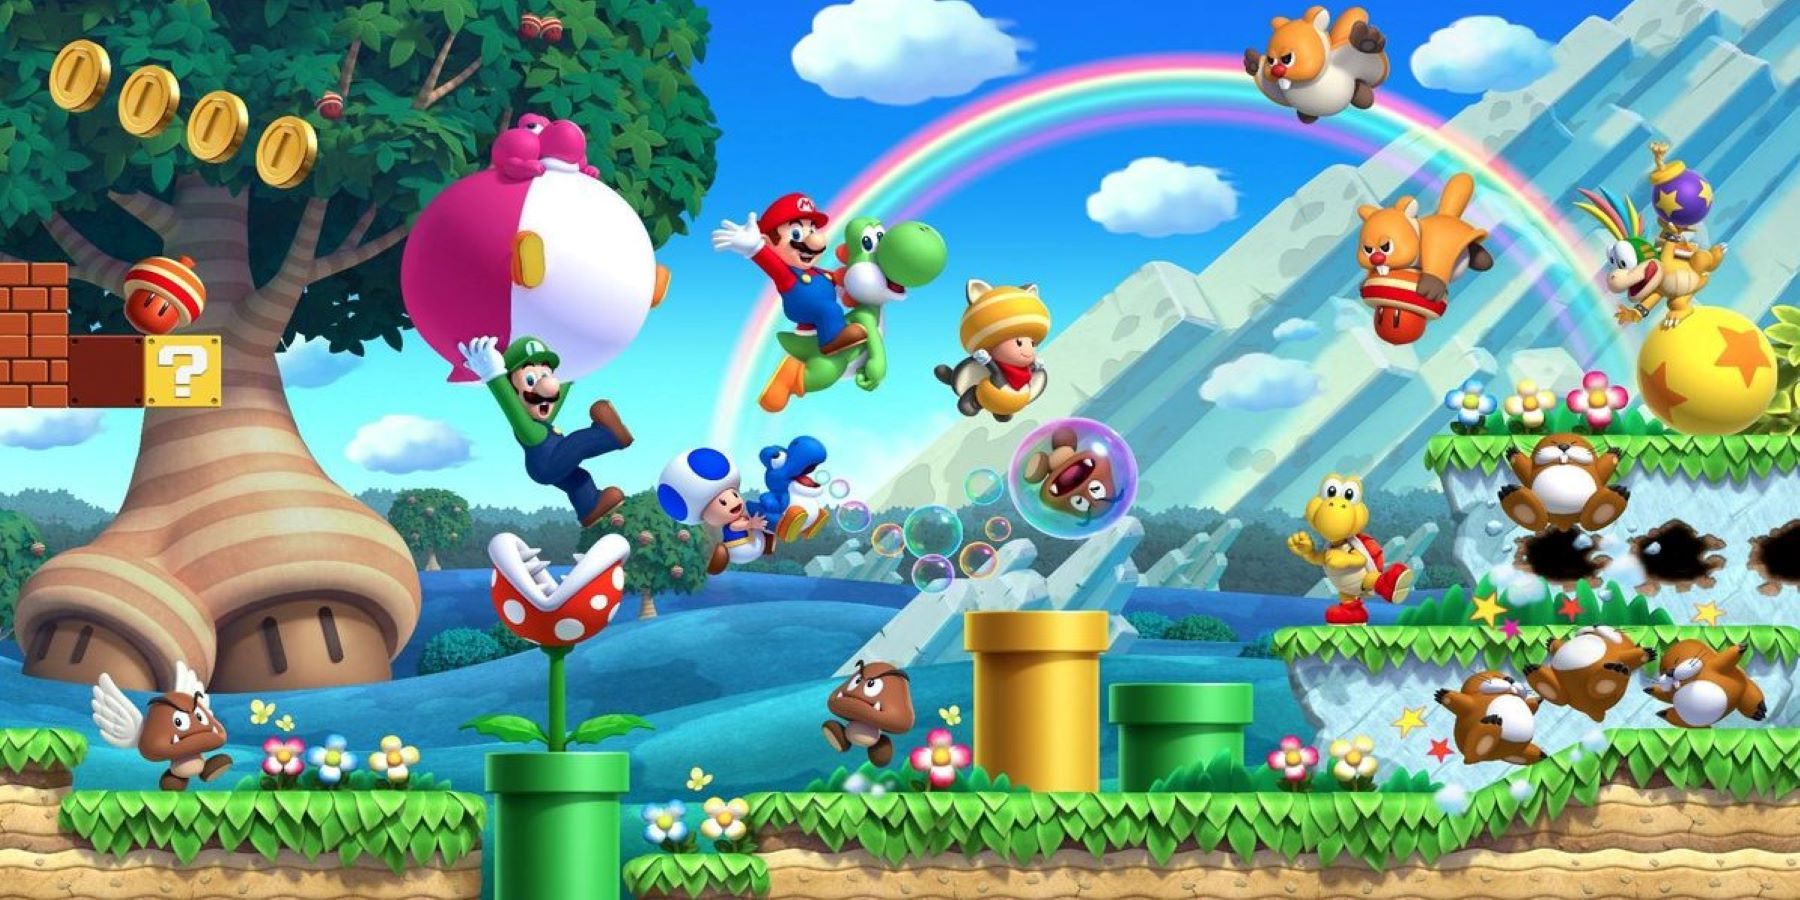 Mario, Yoshi, Blue Toad, and Yellow Toad moving through a New Super Mario Bros. U level with Goombas, Koopas, Monty Moles, Lemmy Koopa, and more enemies